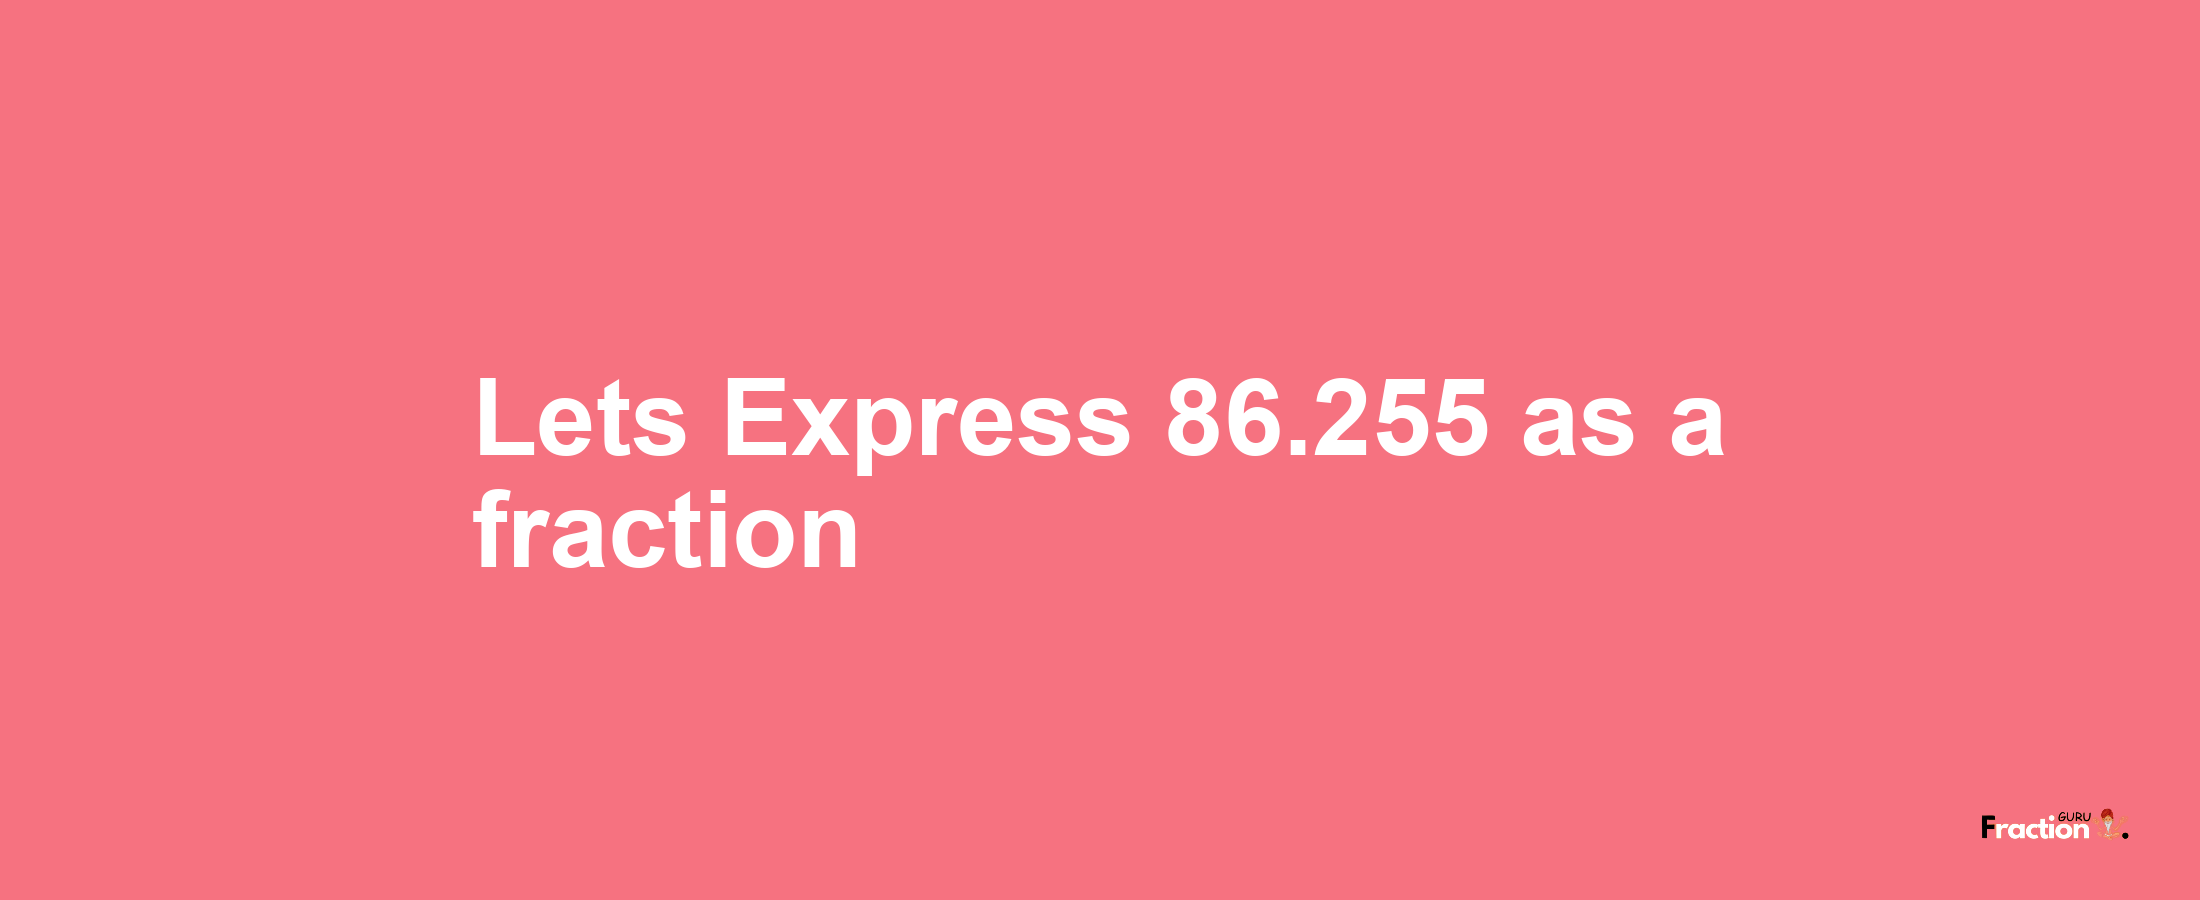 Lets Express 86.255 as afraction